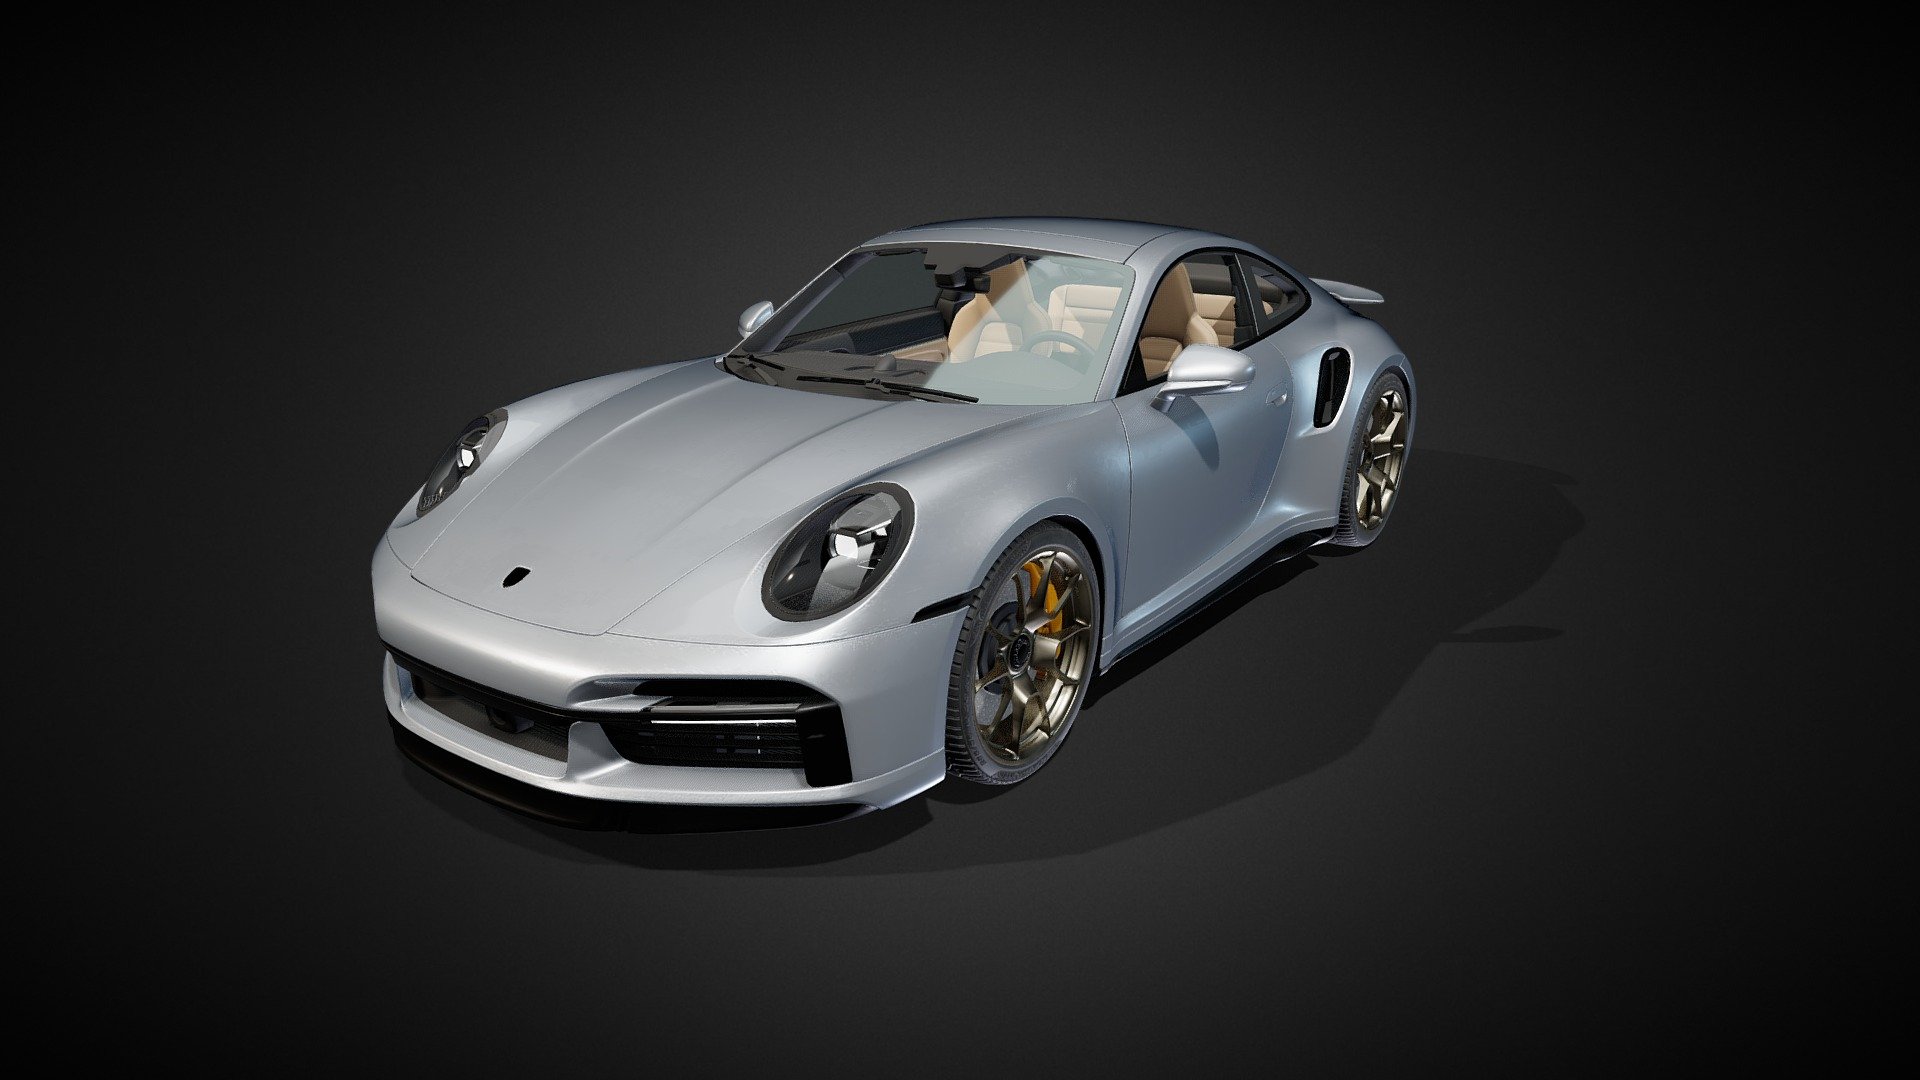 Porsche Carrera 911 Turbo S  - 992

High detailed, realistic sports car model with detailed interior. Doors can be opened, steering wheel is not attached and has proper pivot point for steering



-LOD0 car model: 165035 tris

-LOD0 interior: 98970 tris

-LOD1 car model with blank interior: 19594 tris



Car uses only 5 materials total: Car body, Wheels, Interior, Glass, Plastic/Metal details.



All textures are 4096x4096 and 512x512 for plastic/metal details.

PSD files for color customization are included.

.Max source file included - Porsche Carrera 911 Turbo S 992 - Buy Royalty Free 3D model by arunas b. (@arunasb) 3d model